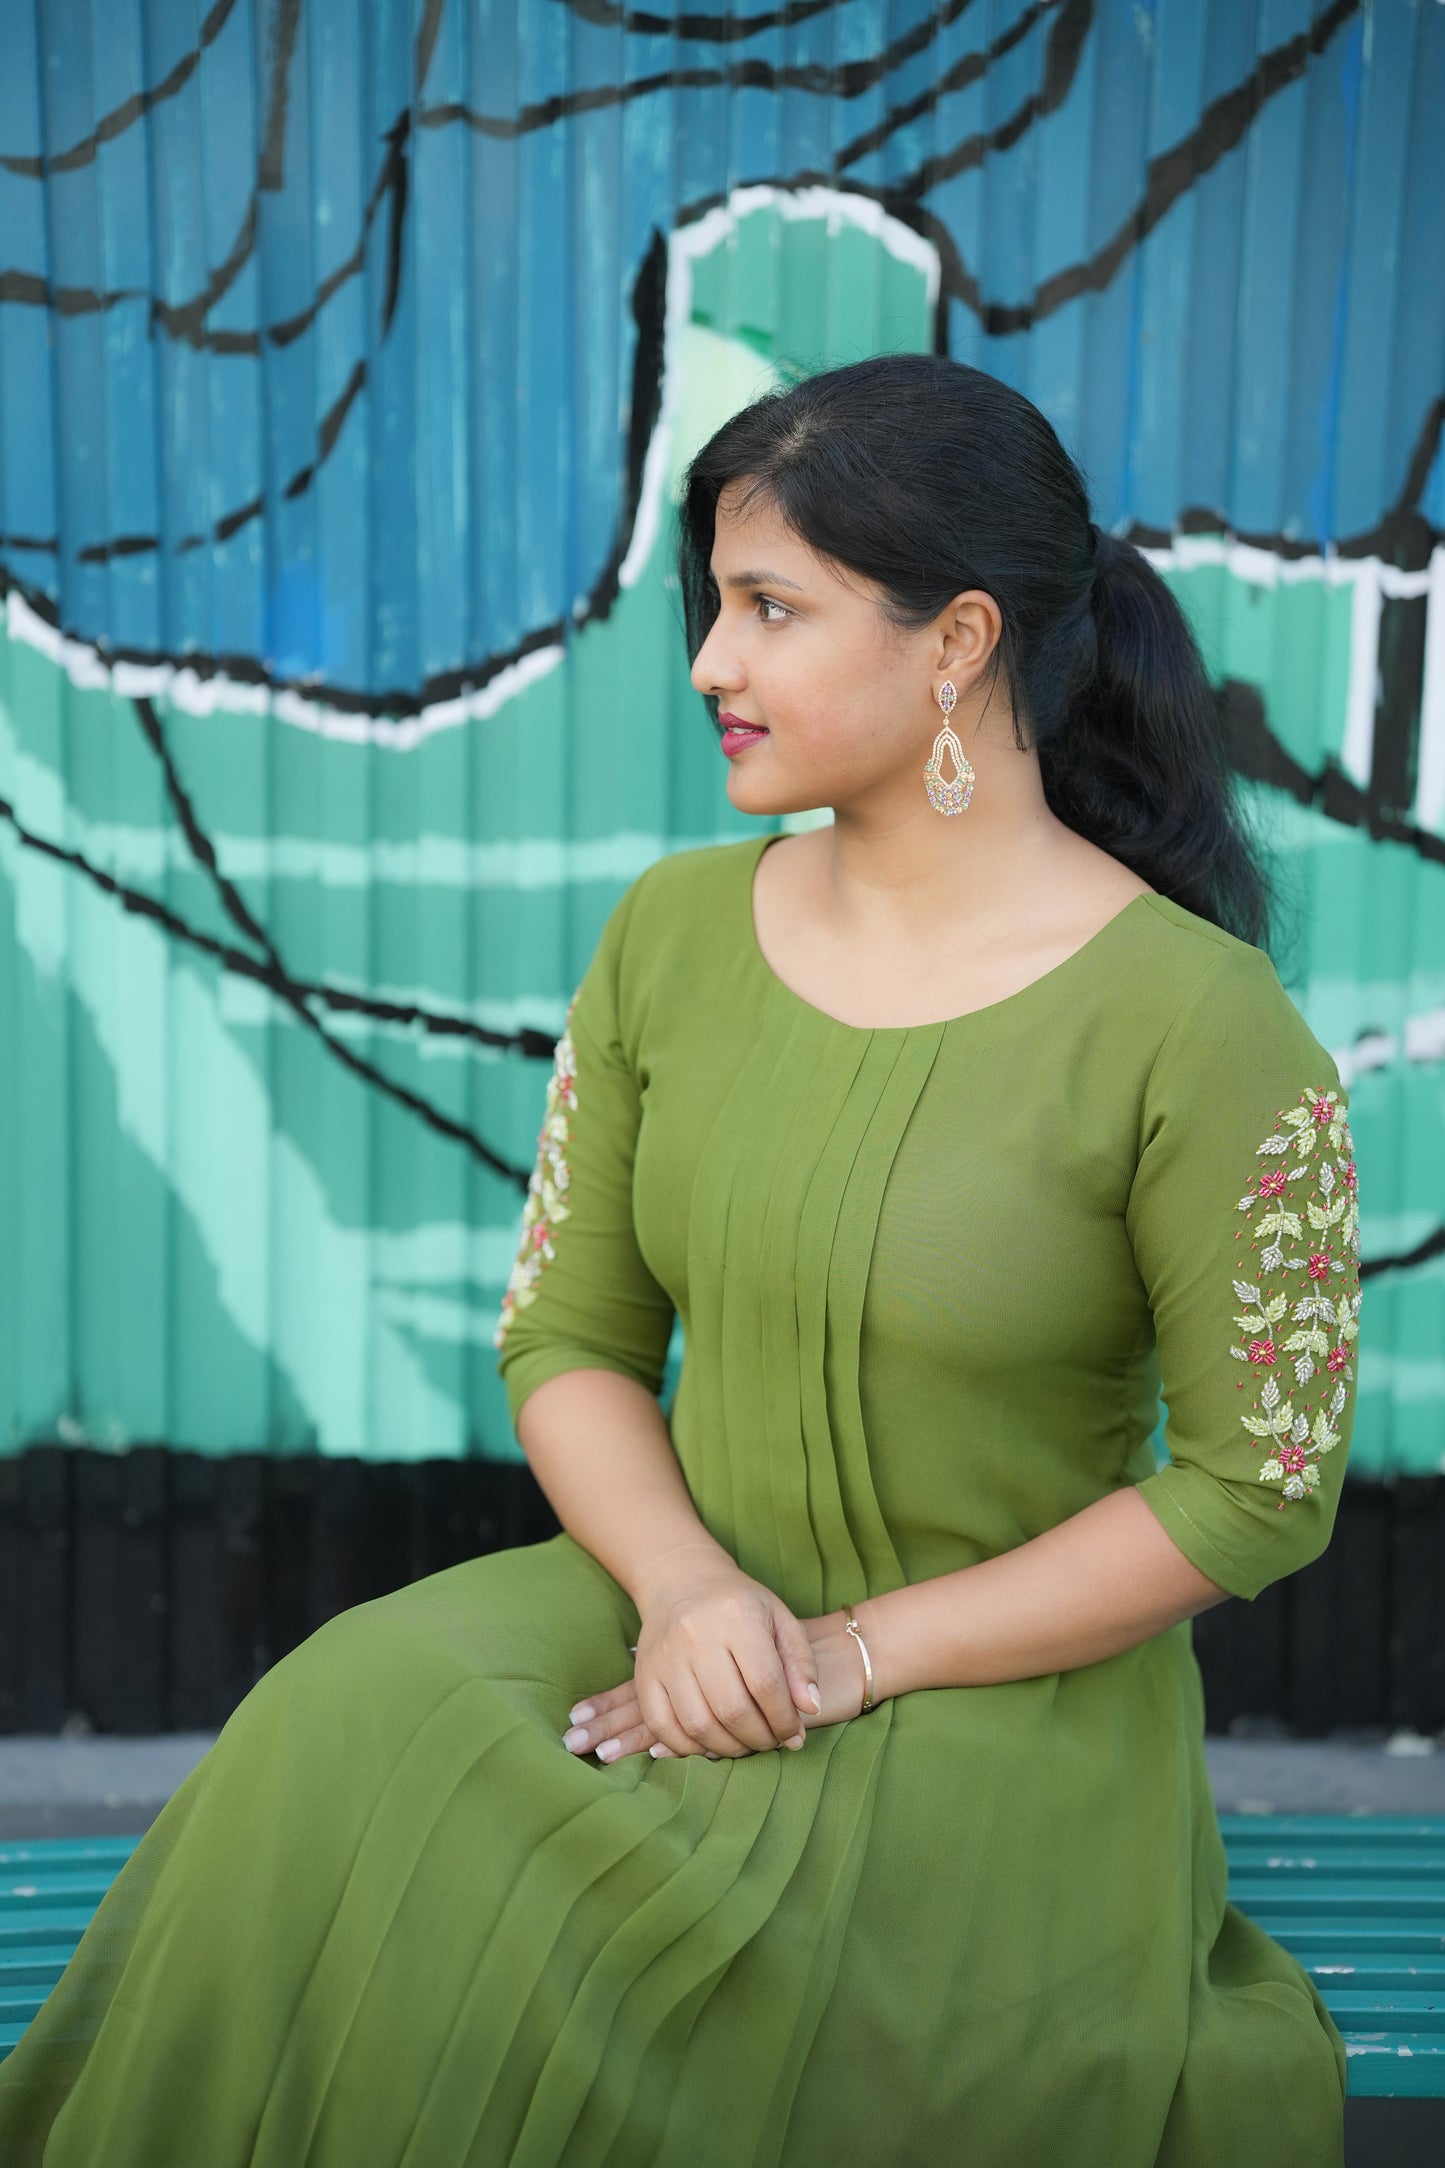 Georgette kurti with pleats and handwork in green gram shade